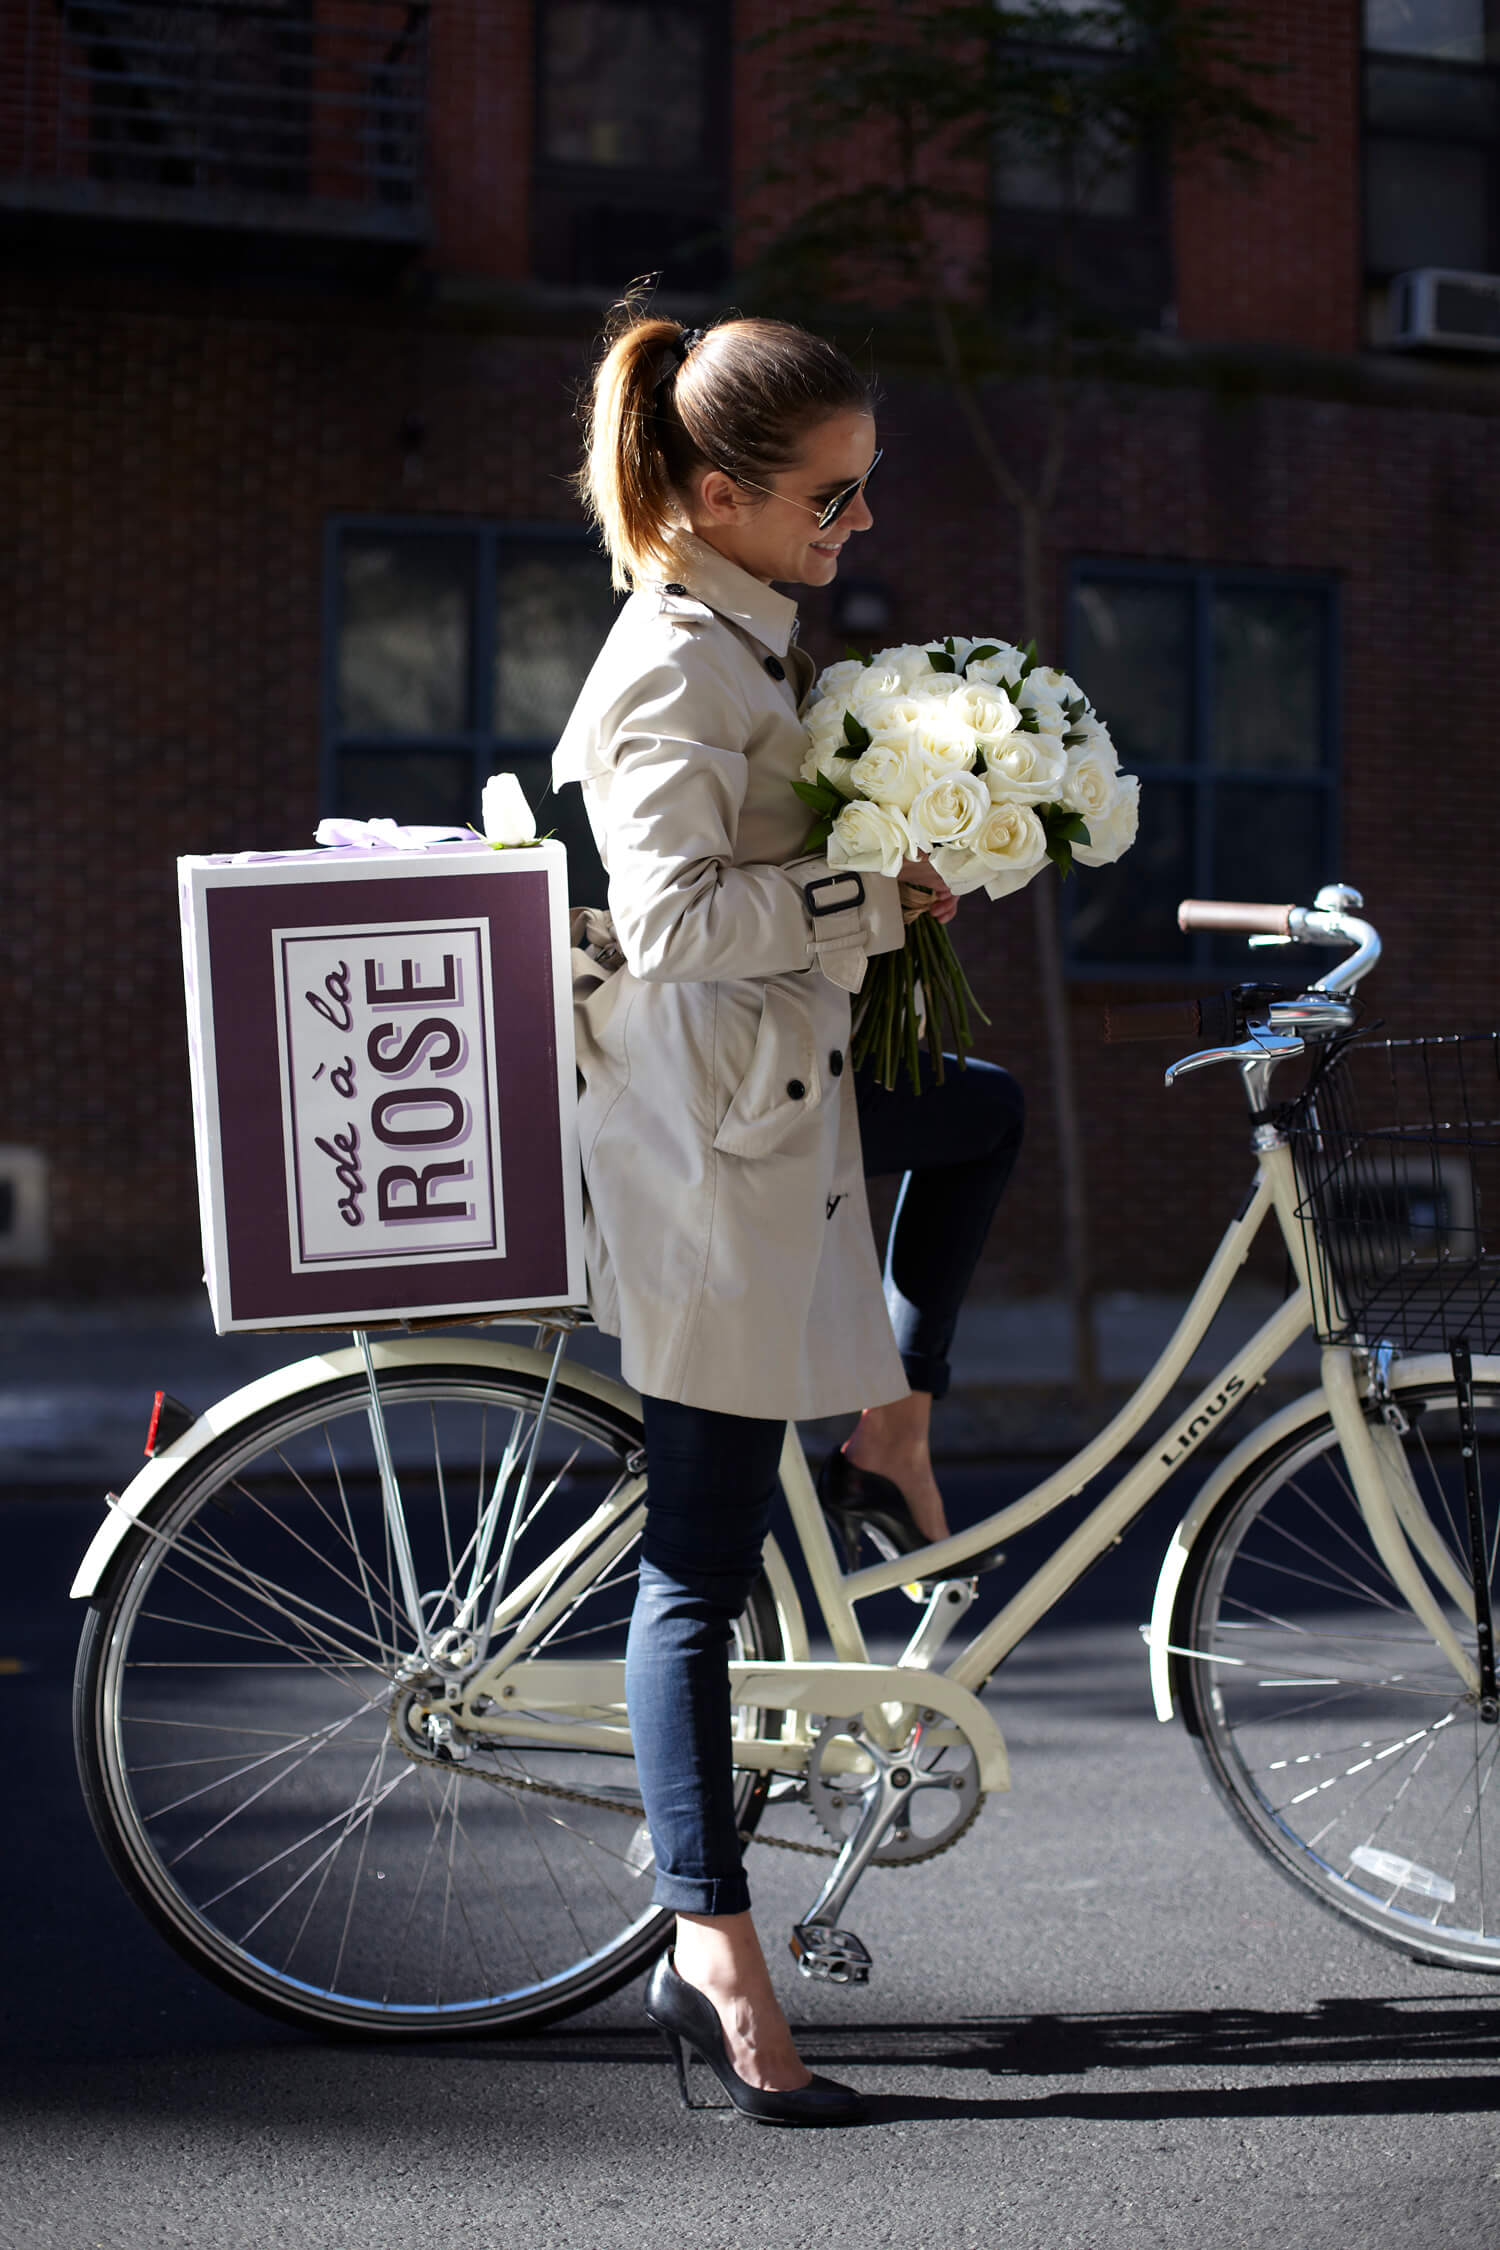 Woman on a bike with flowers